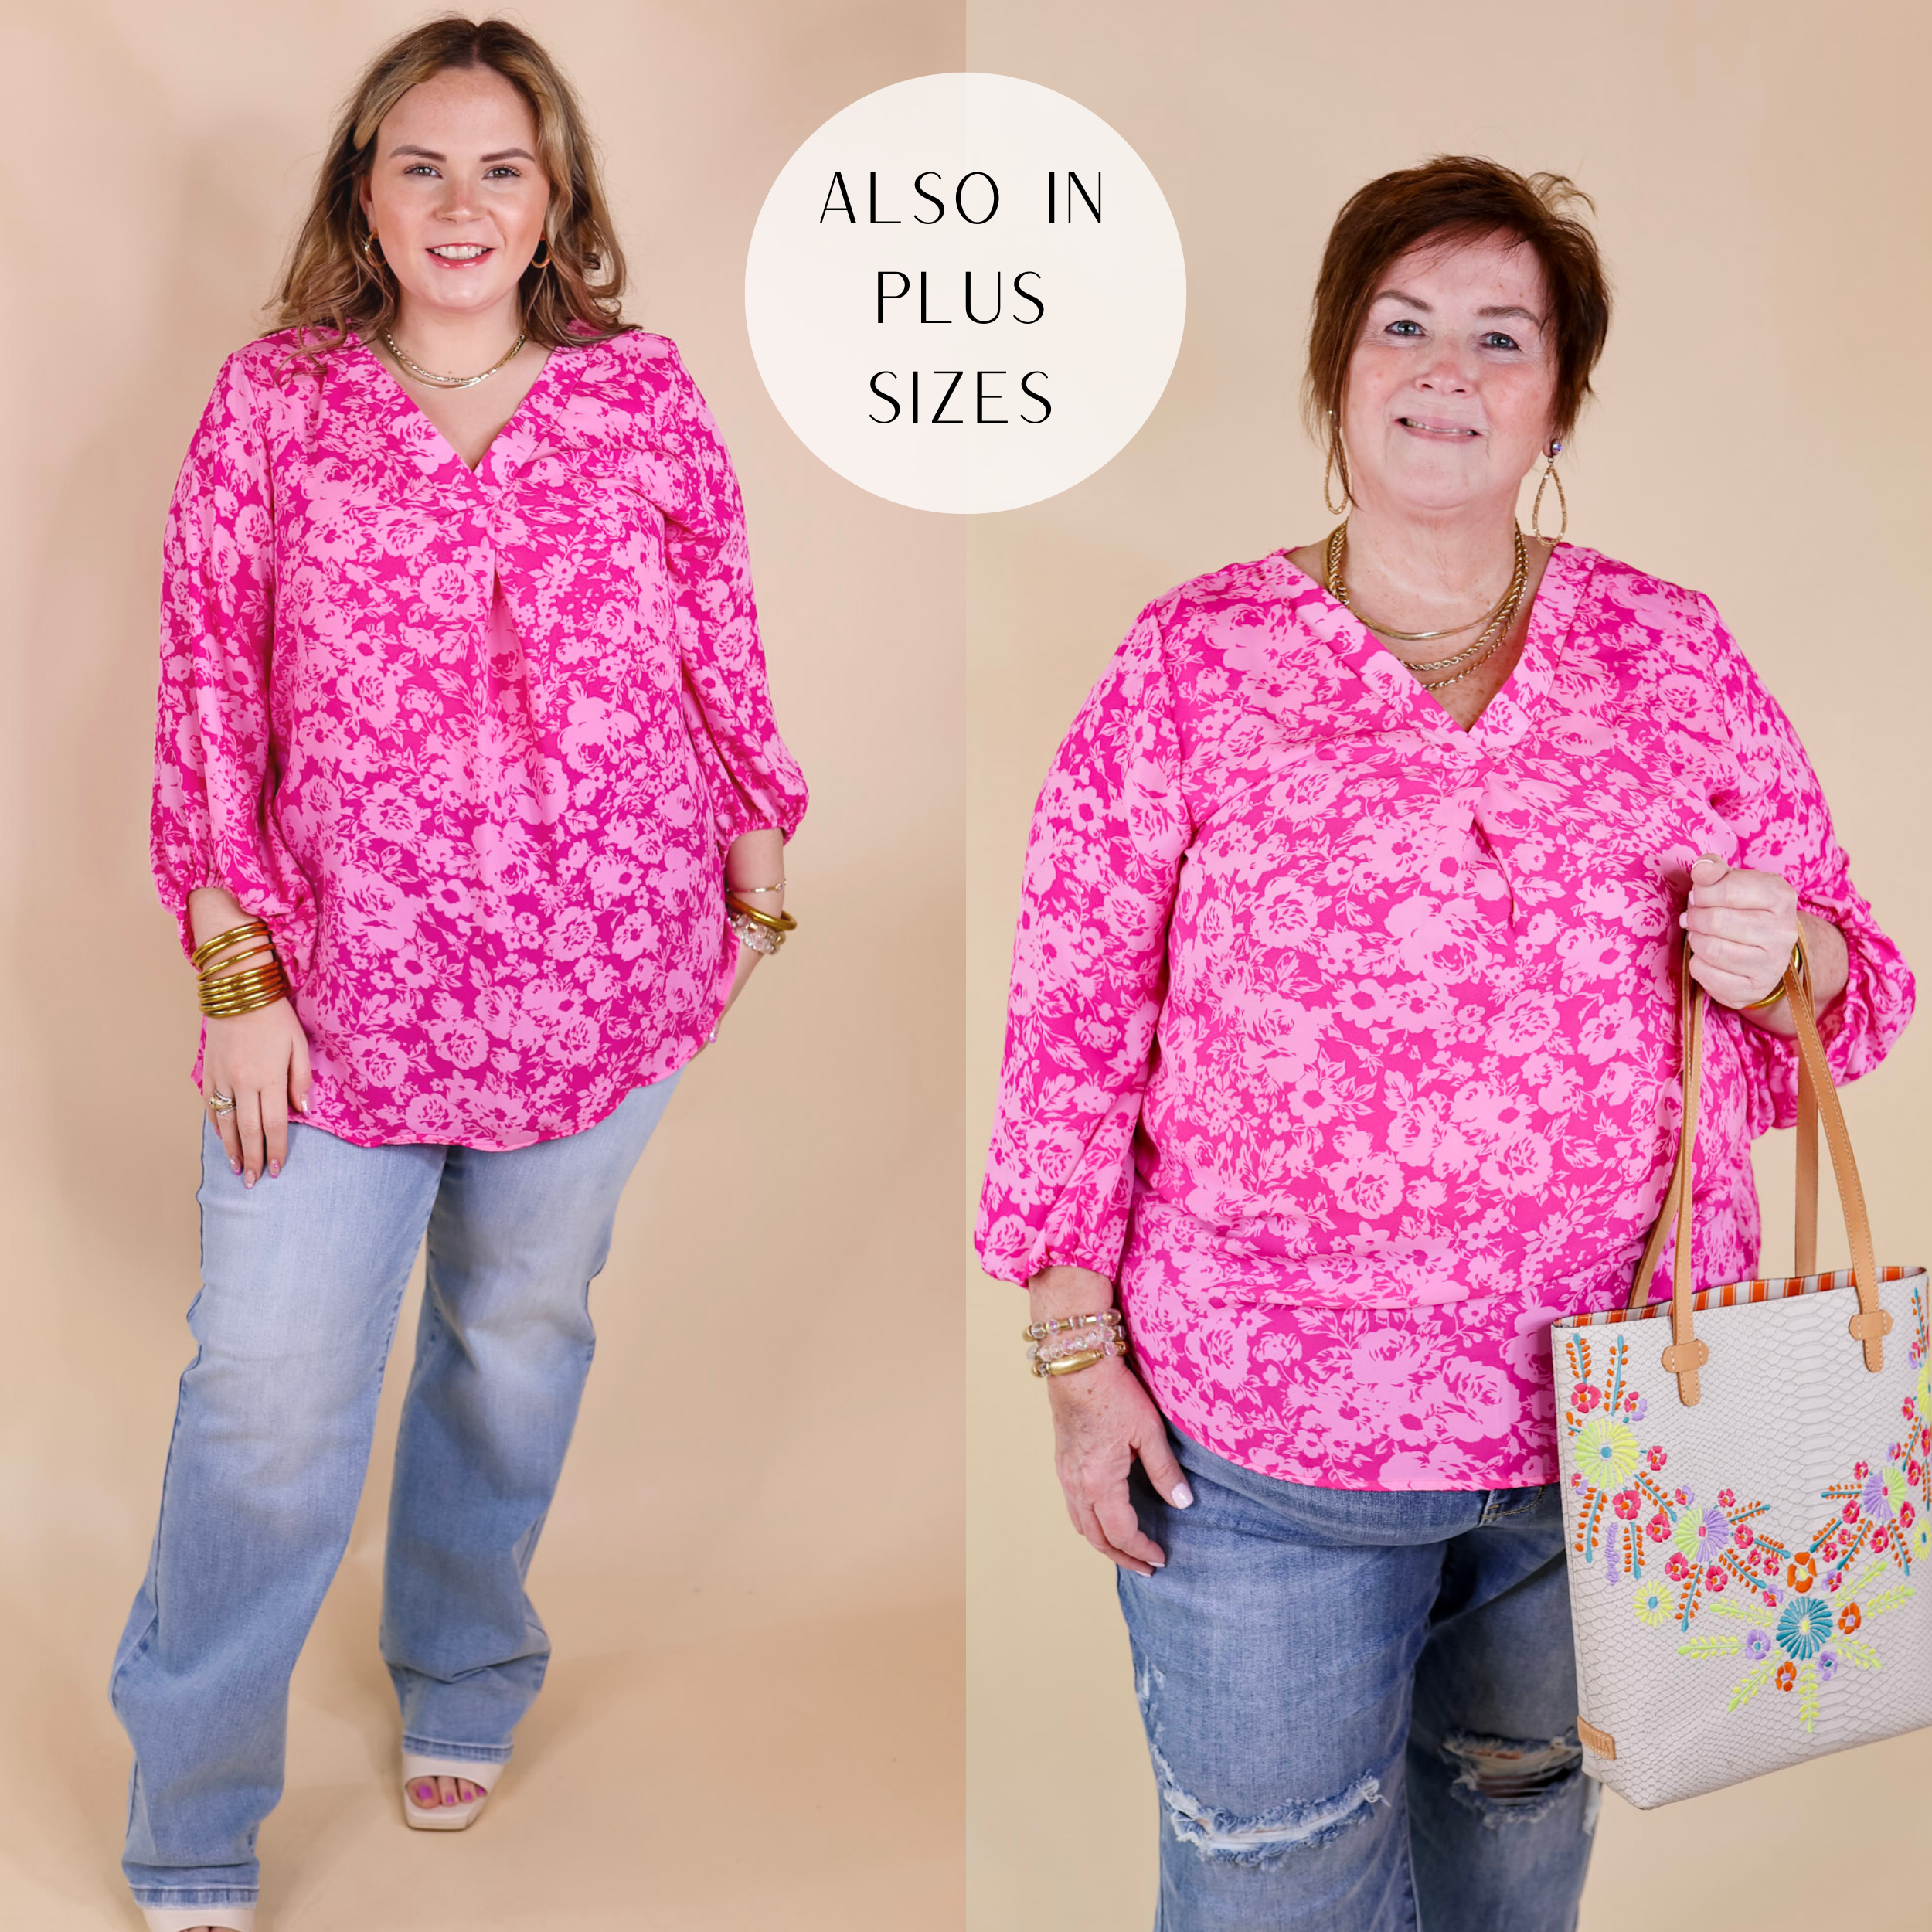 Models are wearing a pink floral top with 3/4 sleeves and a placket v neckline. Size large model has it paired wide leg pants, ivory heels, and gold jewelry. Plus size model has it paired with distressed jeans, a snakeskin purse, and gold jewelry.